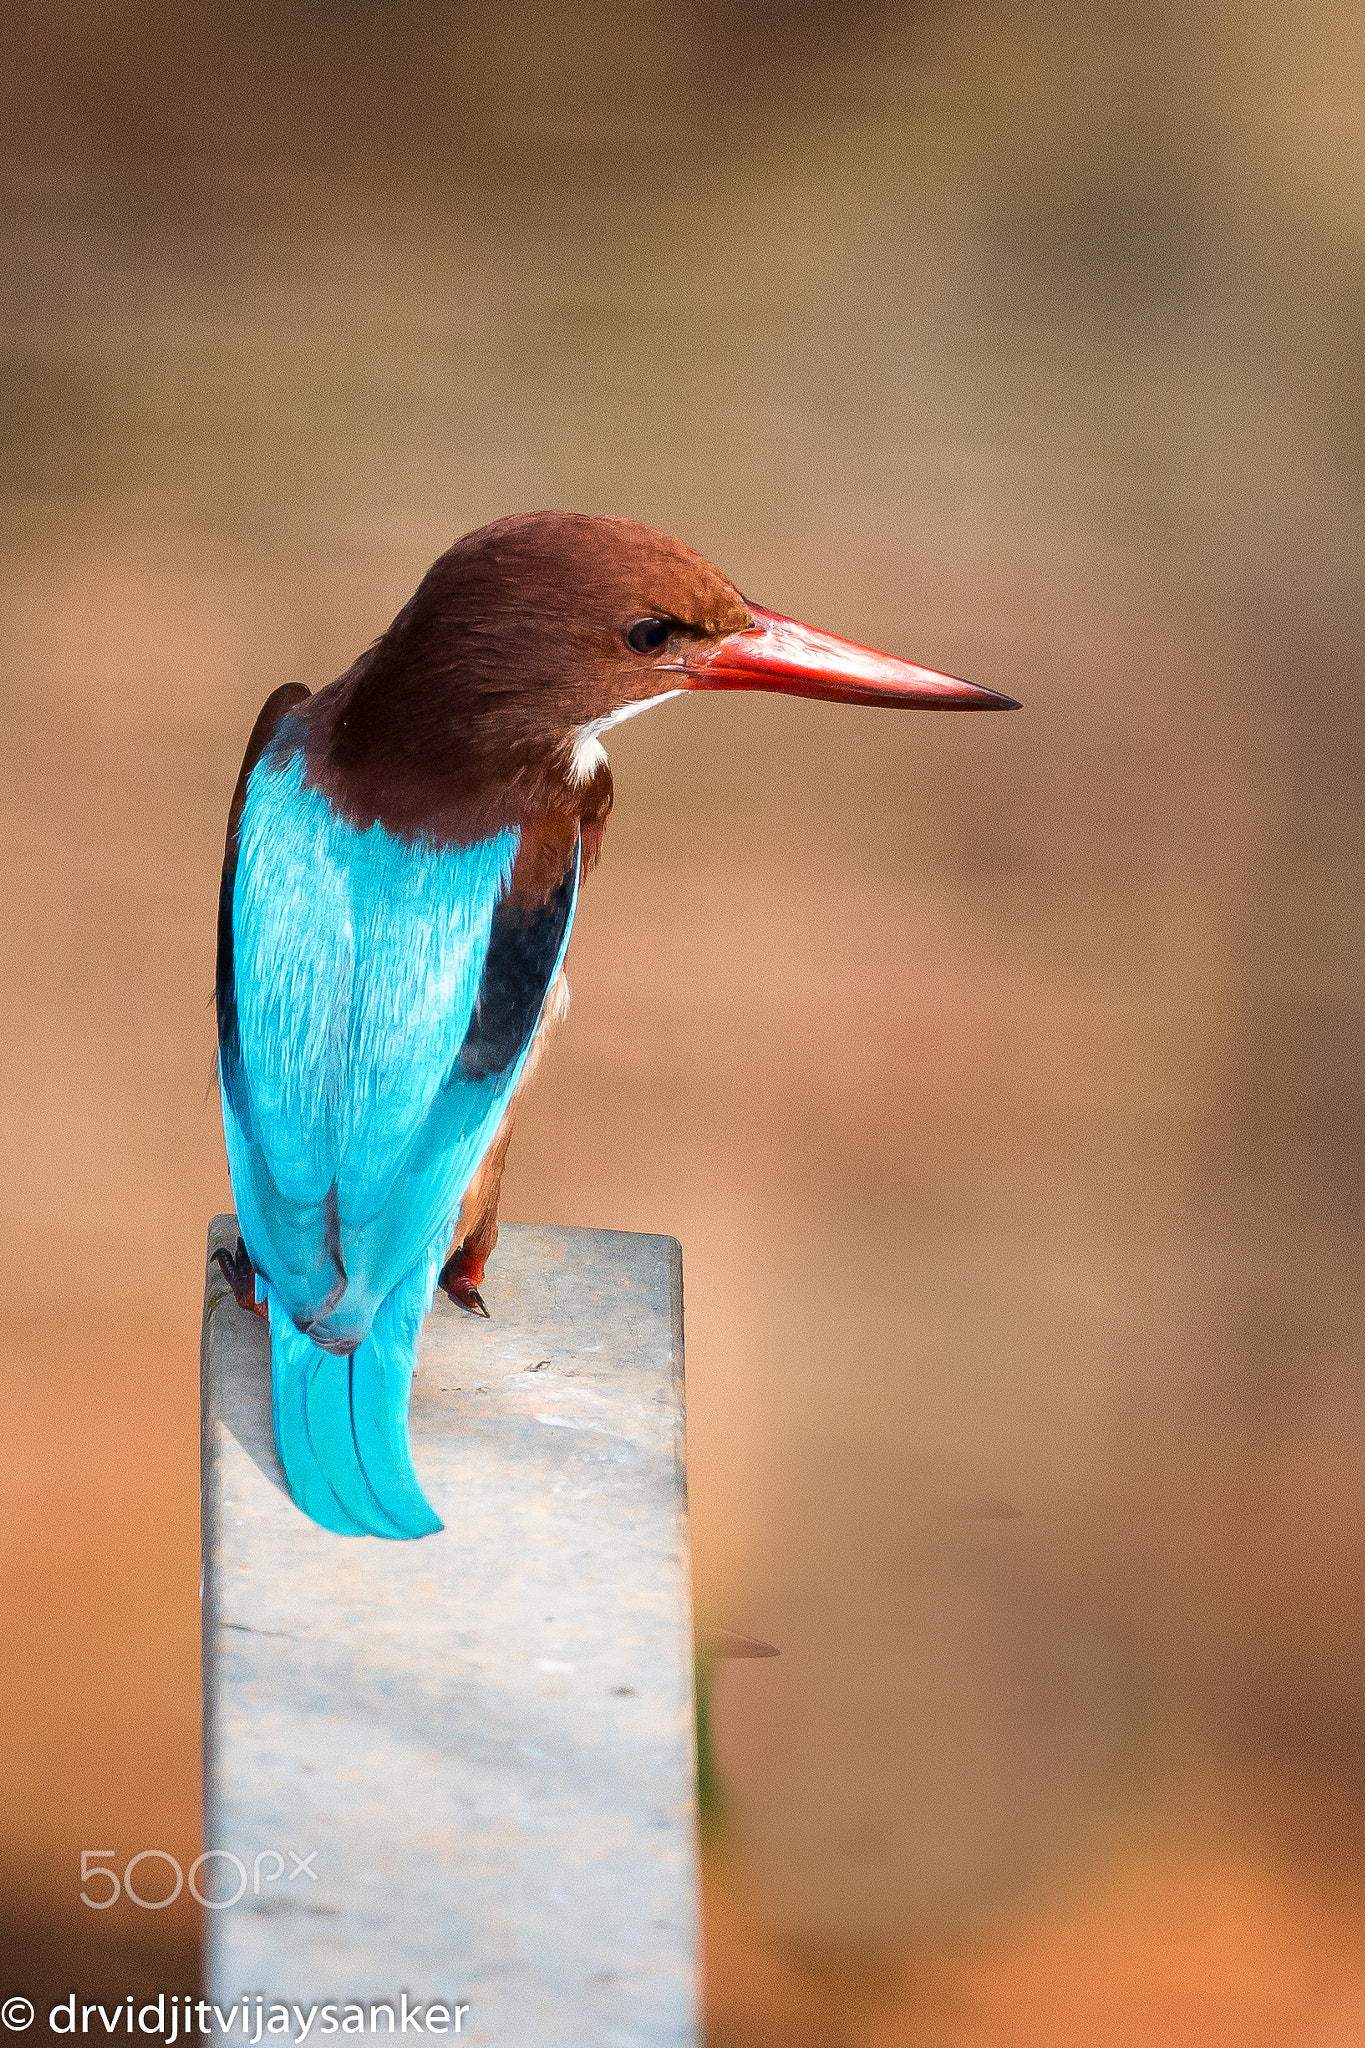 White-throated kingfisher (Halcyon smyrnensis)